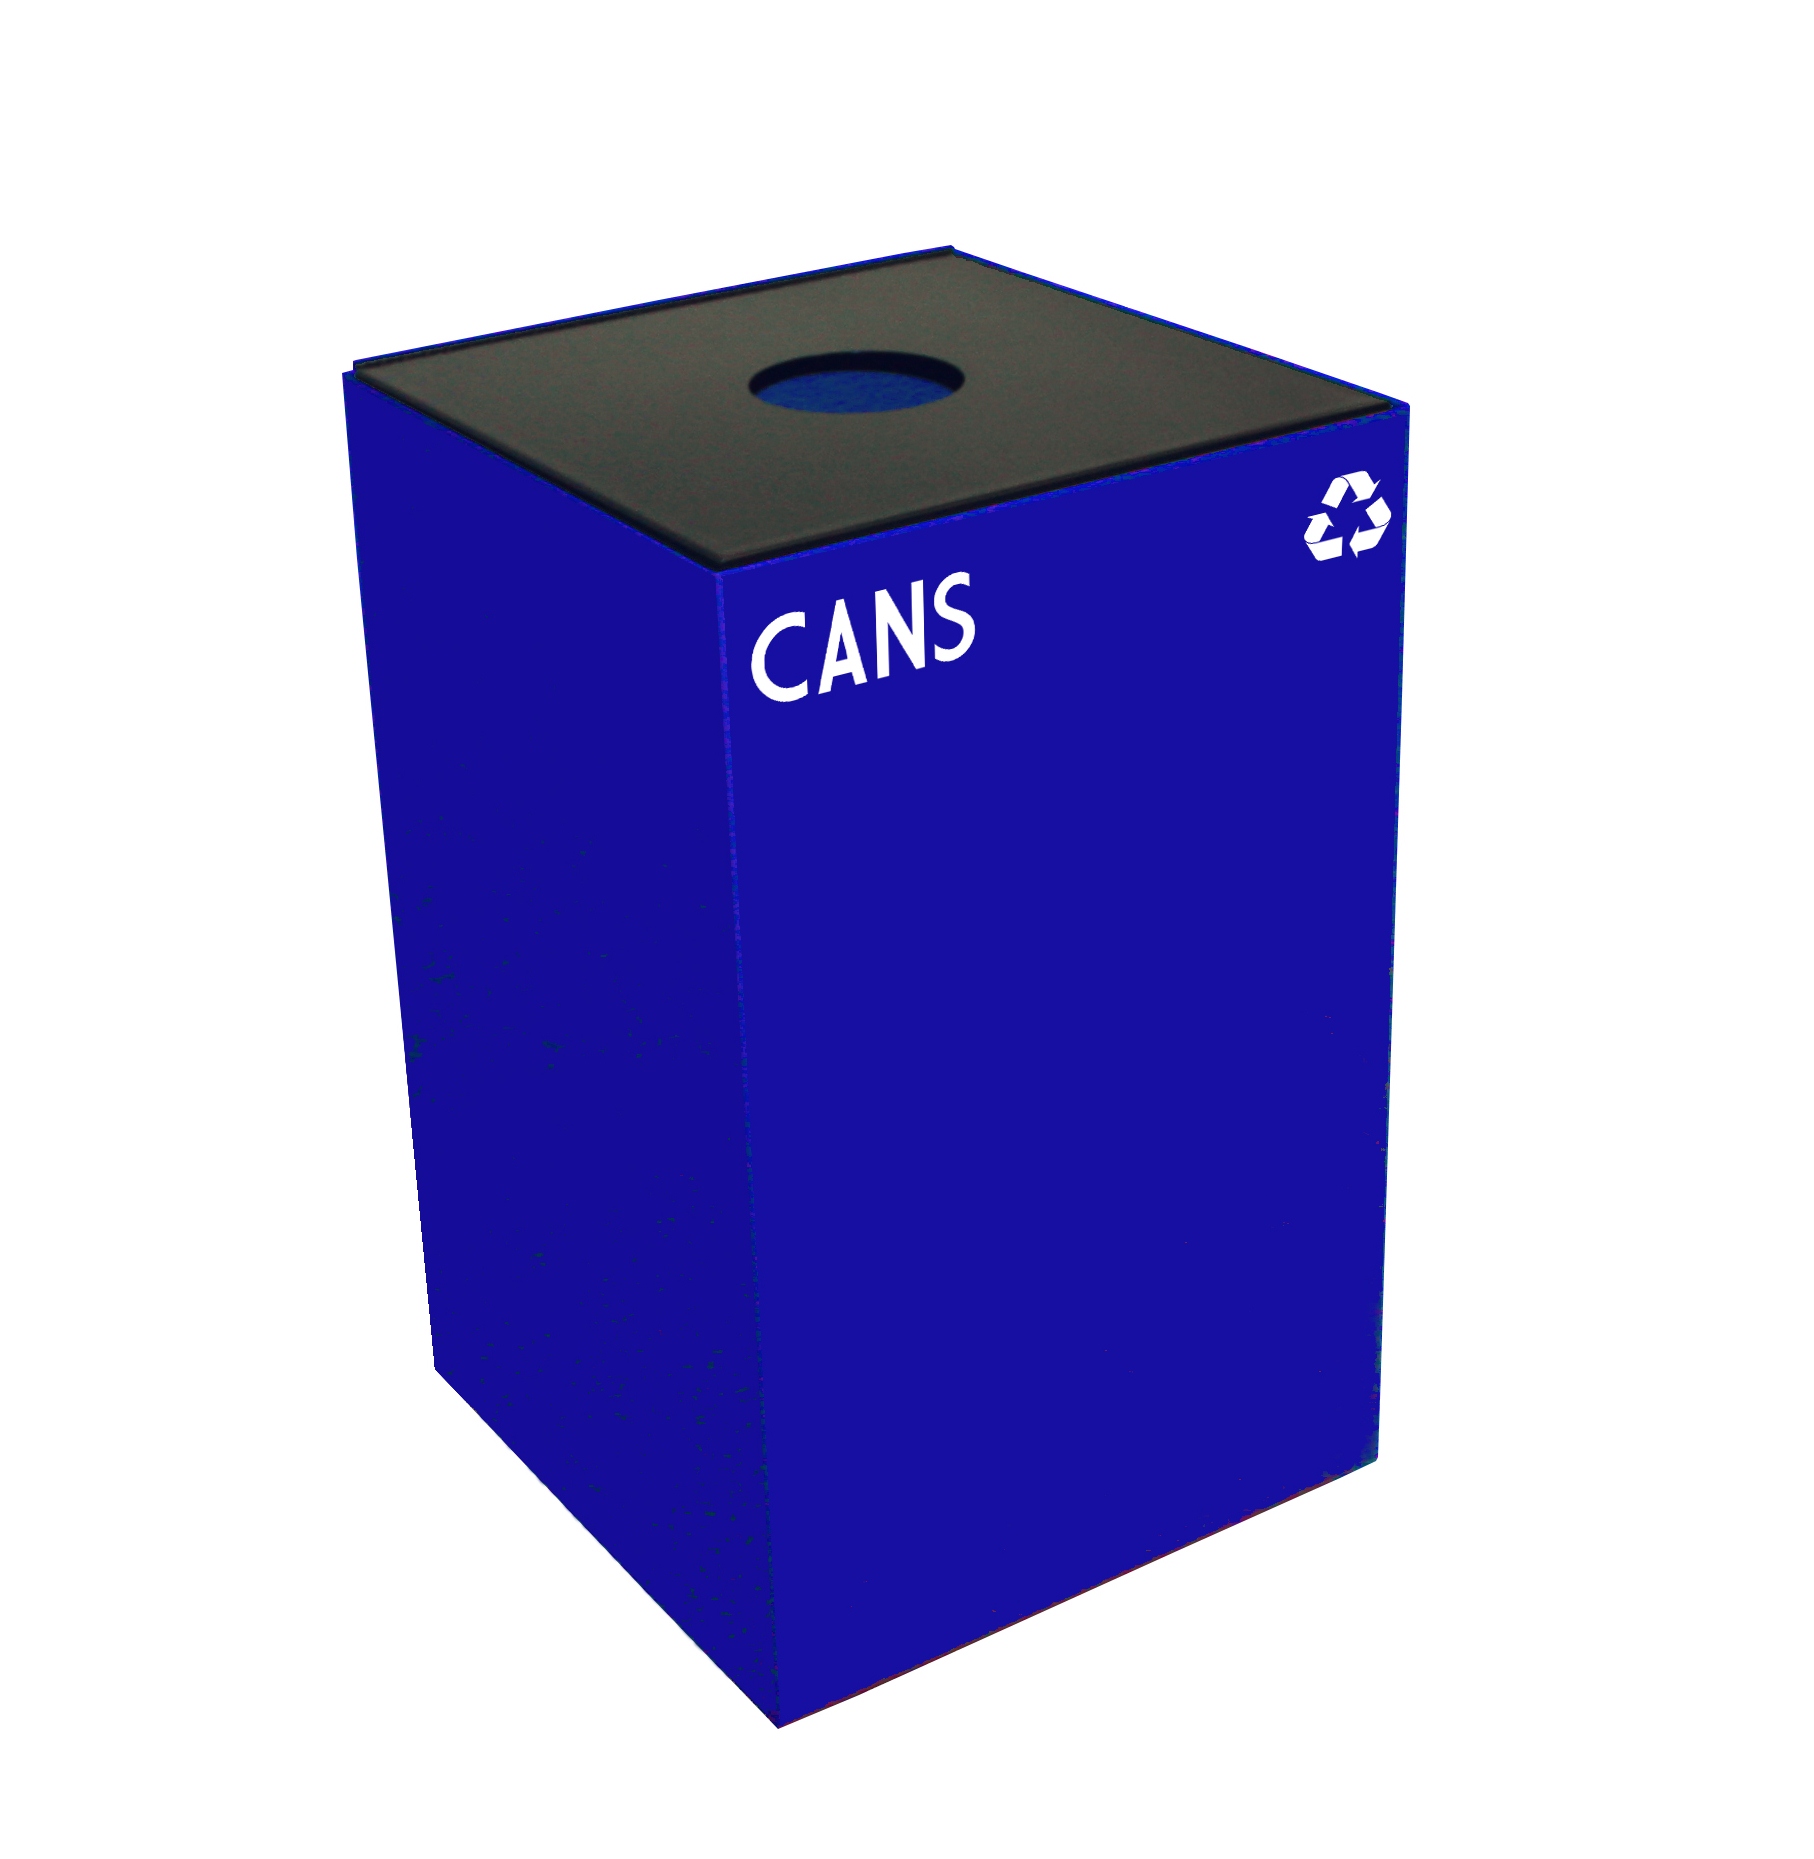 Square Recycling Containers For Cans